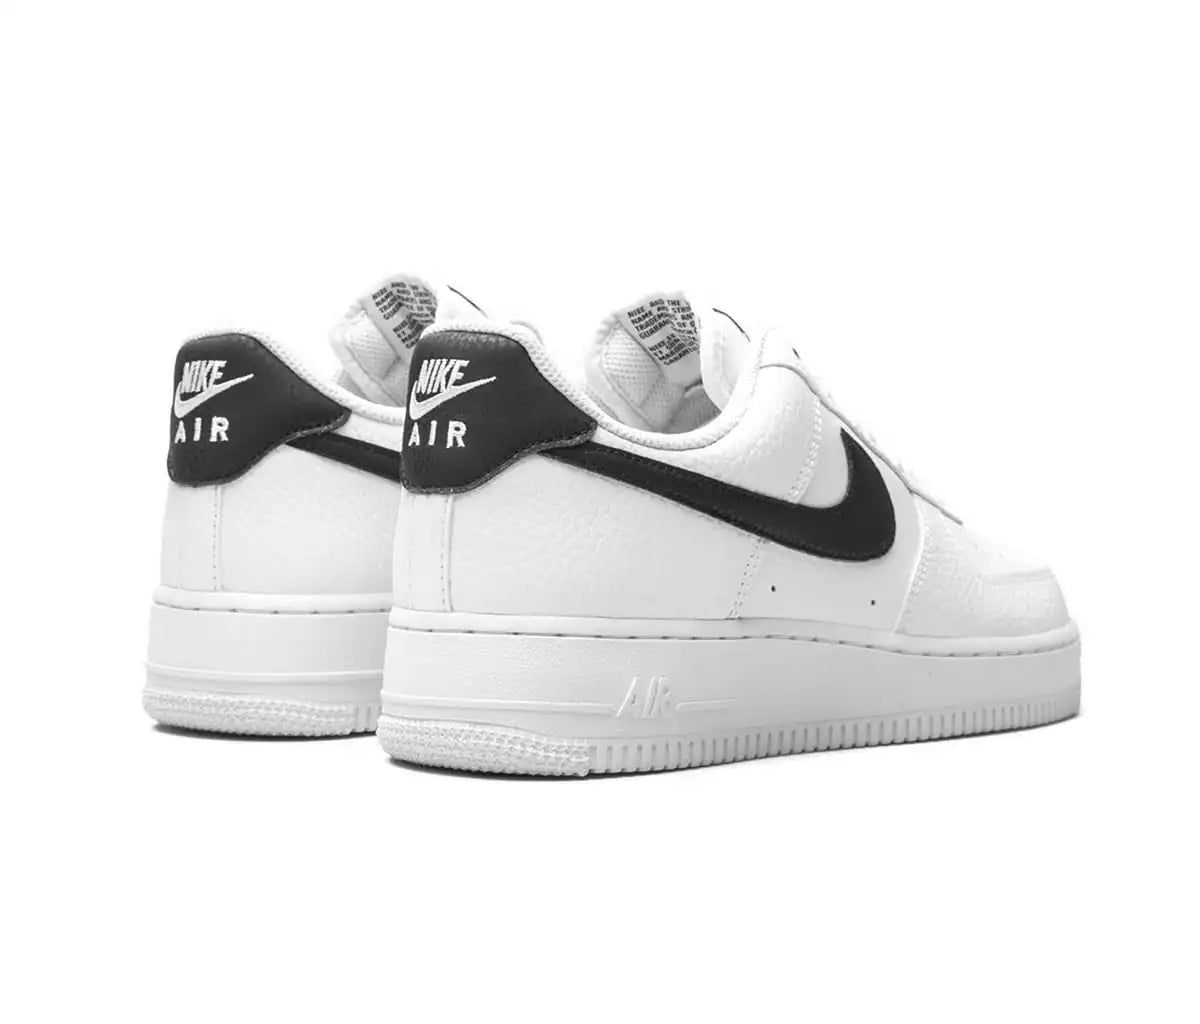 Nike Air Force 1 Low White Black Pebbled Leather - soleHub